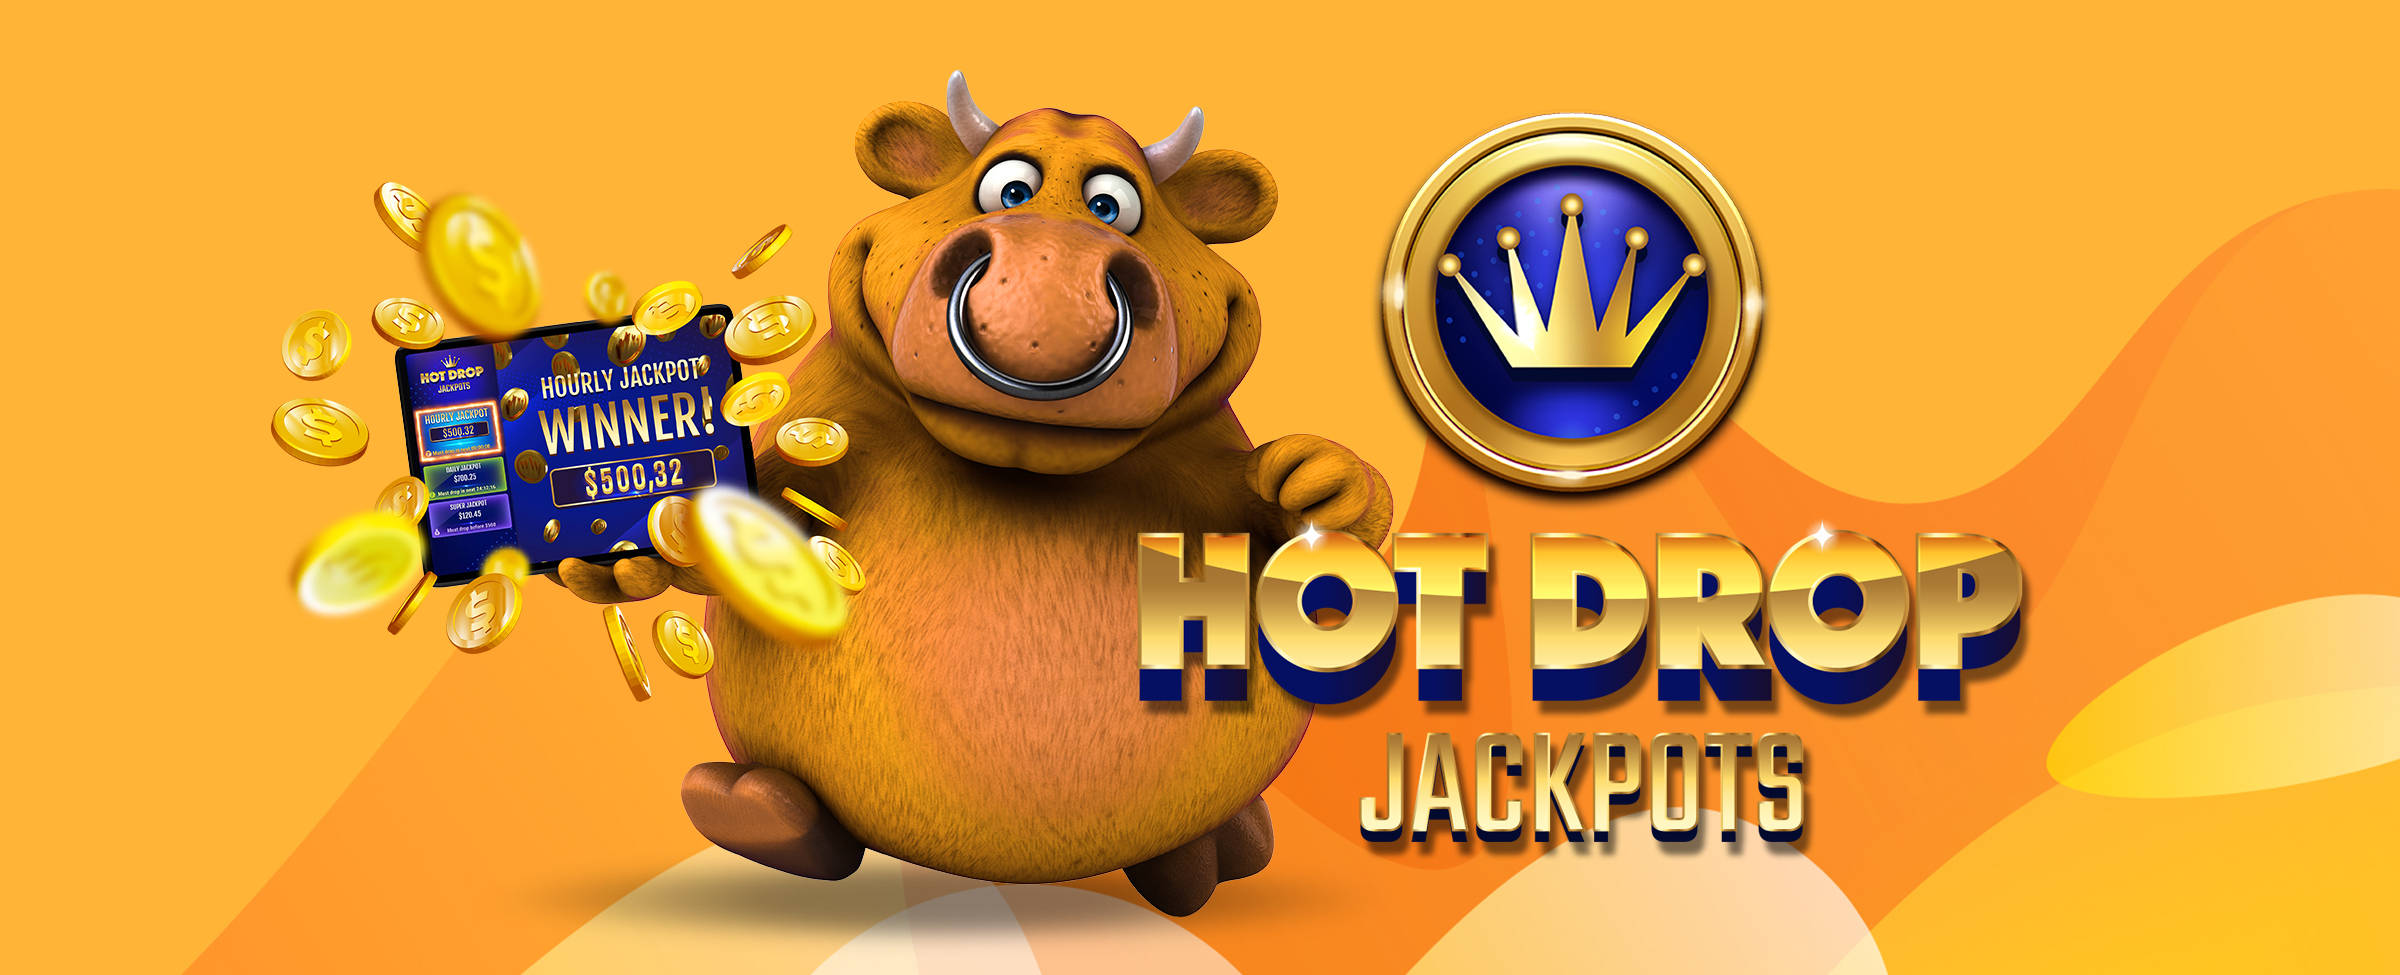 Hot Drop Jackpots are new at SlotsLV, so if you aren’t already familiar with them, read on to learn what they are, and the benefits of this top new game.